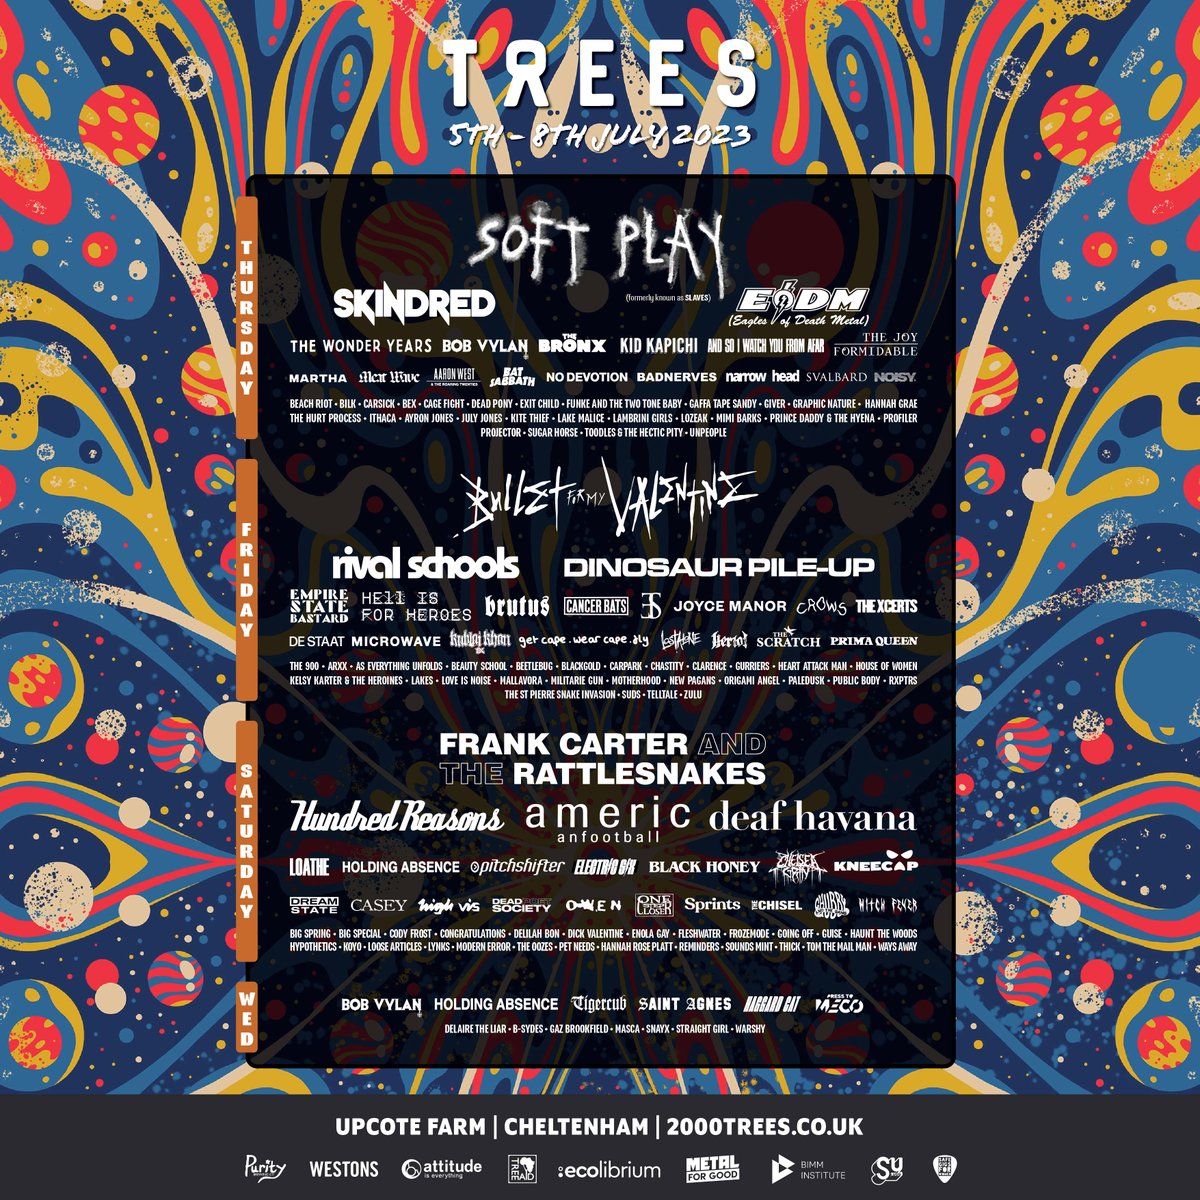 We've got two @2000trees tickets to giveaway!! Who wants to join us? All you have to do is head to the link below and type in 'Deaf Havana' when asked who sent you. Simple!! See you there: 2000trees.co.uk/landing/BANDCO…